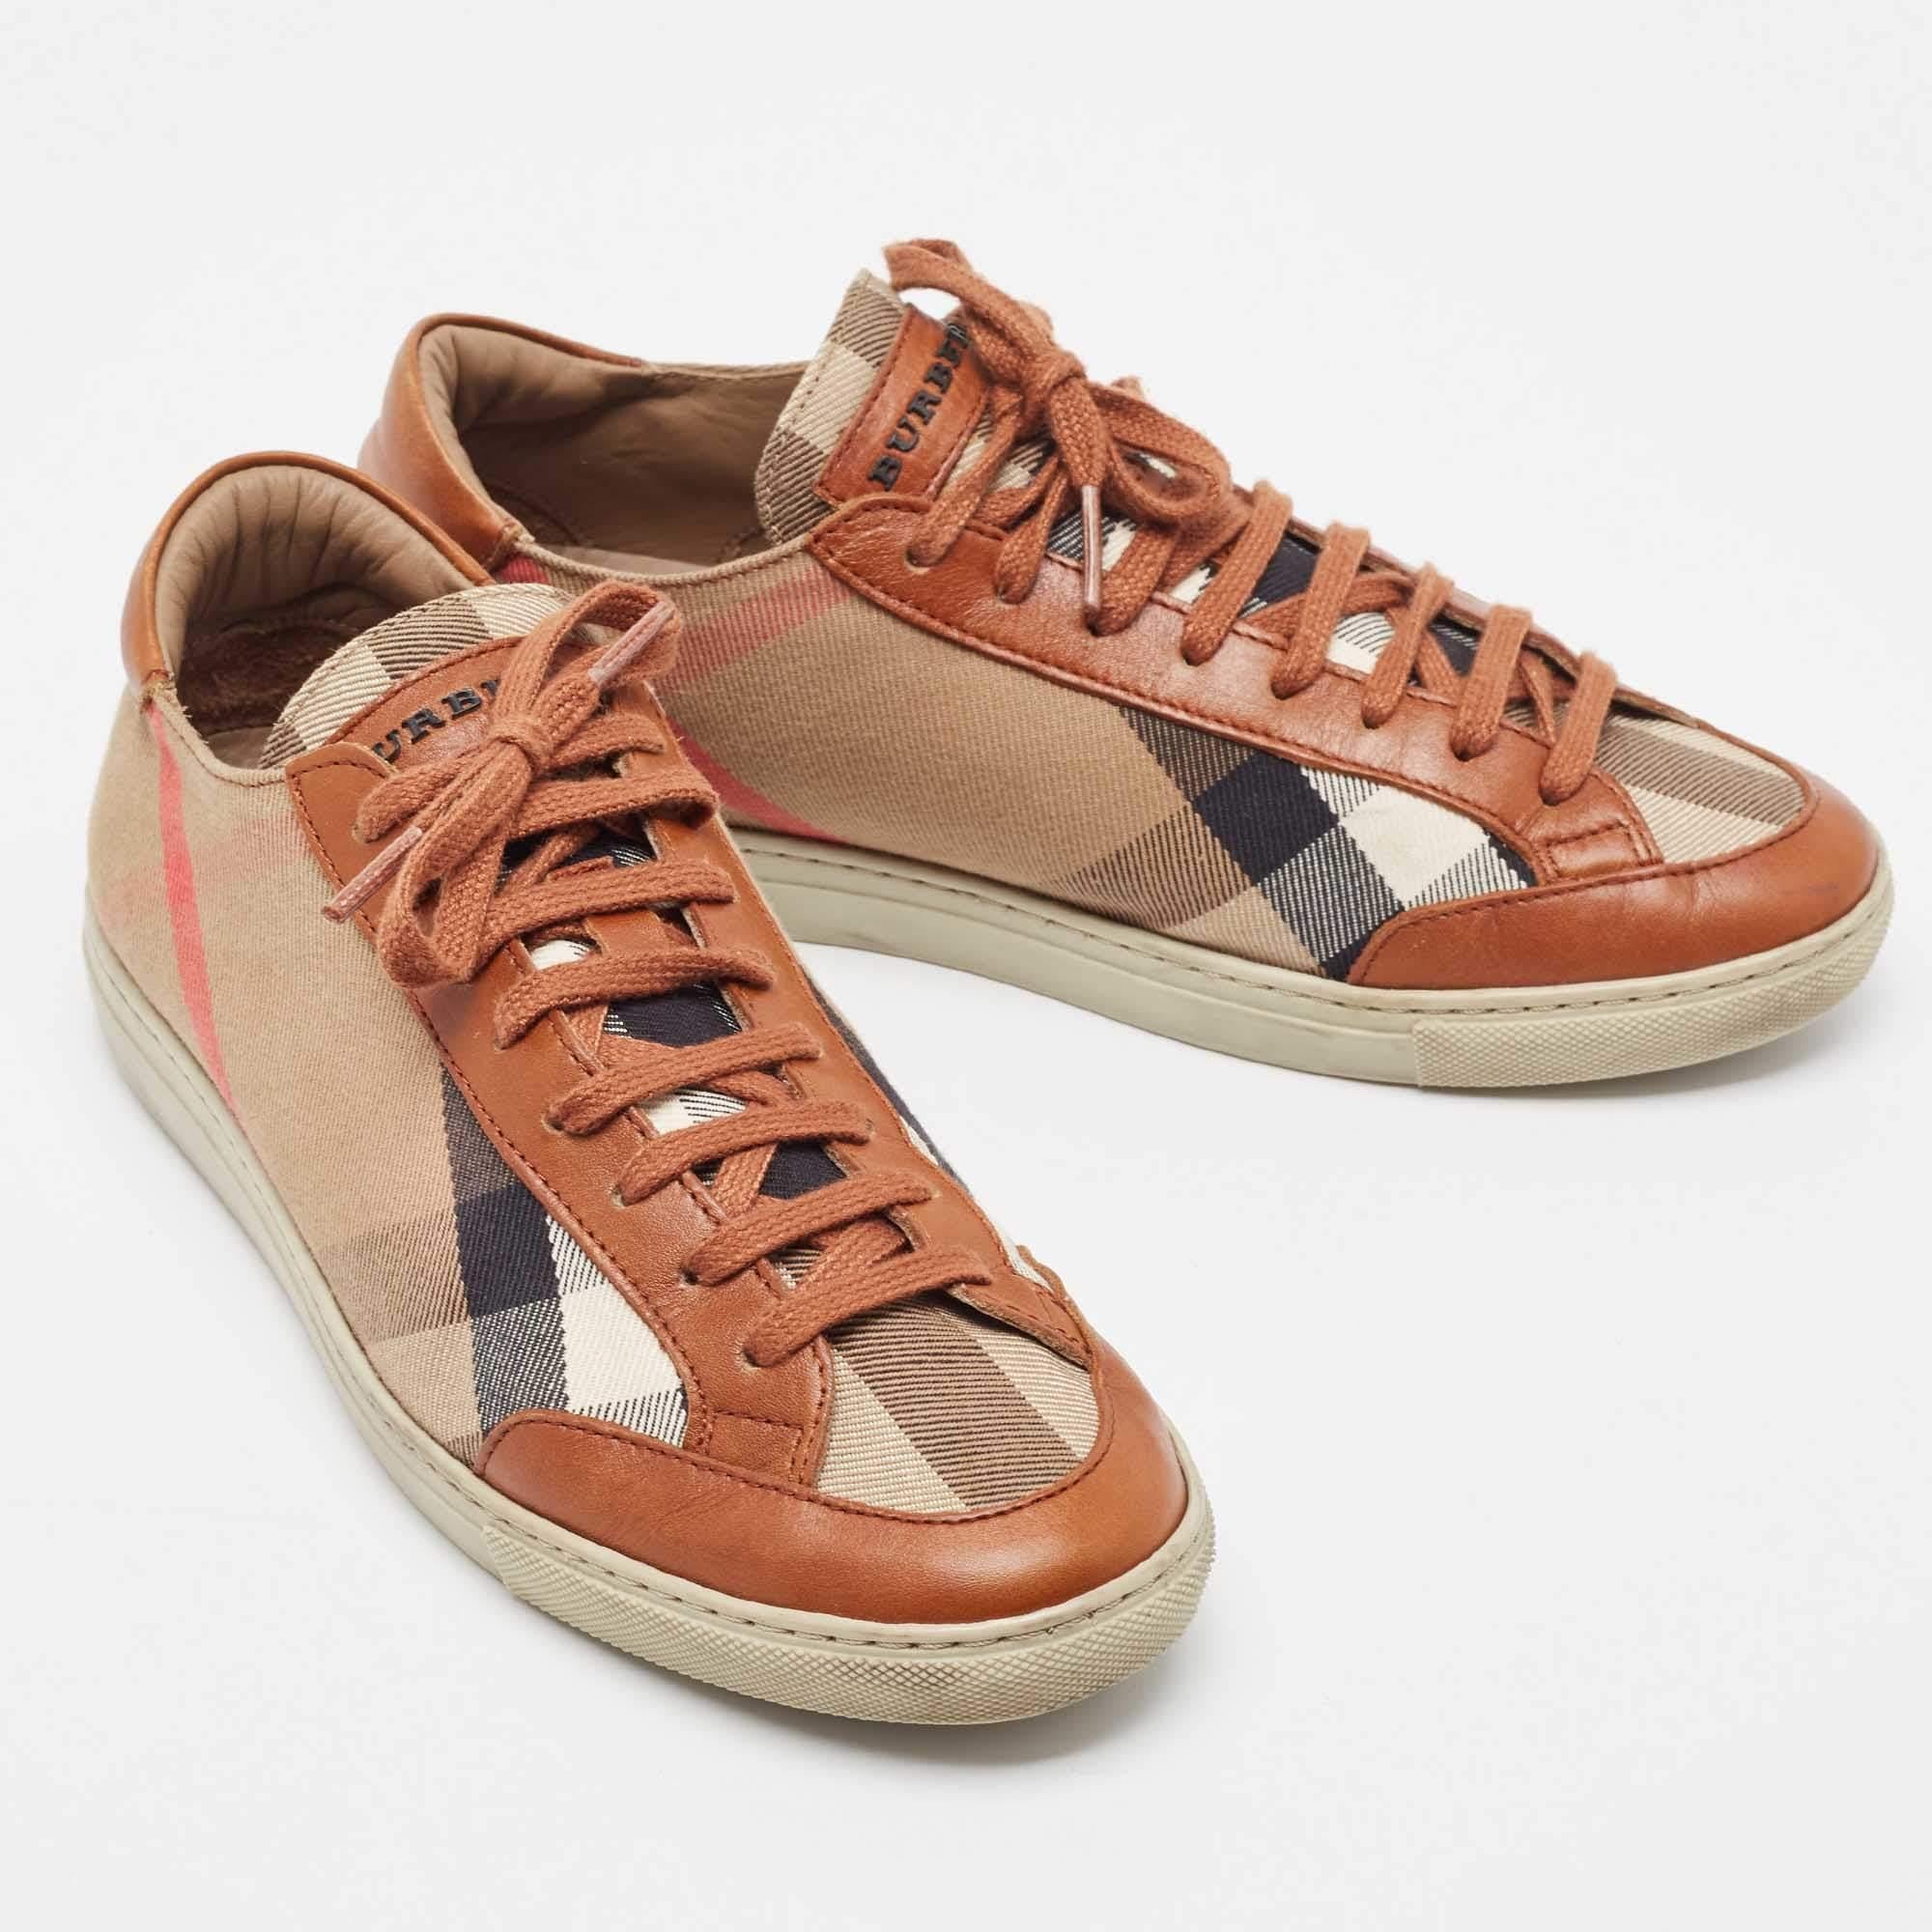 Burberry Brown/Beige Nova Check Canvas and Leather Lace Up Sneakers Size 39 In Good Condition For Sale In Dubai, Al Qouz 2